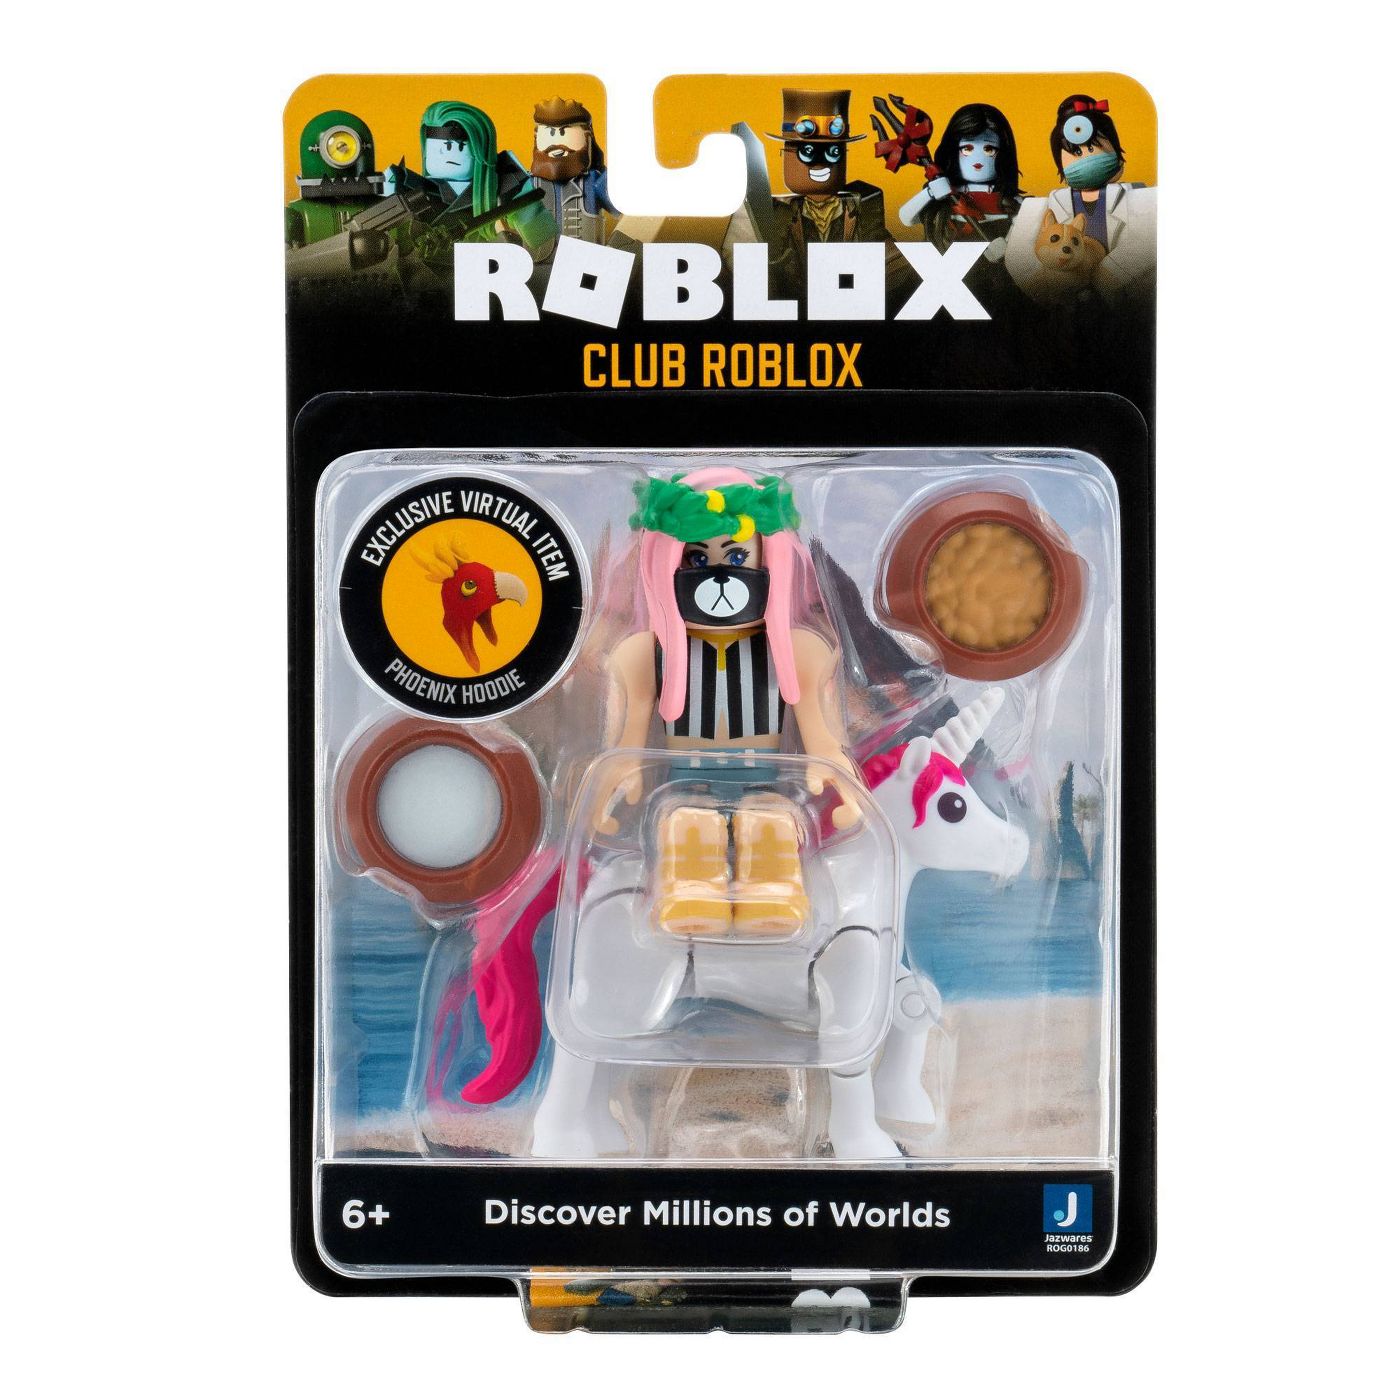 Roblox Celebrity Collection - The Clouds: Flyer Figure Pack